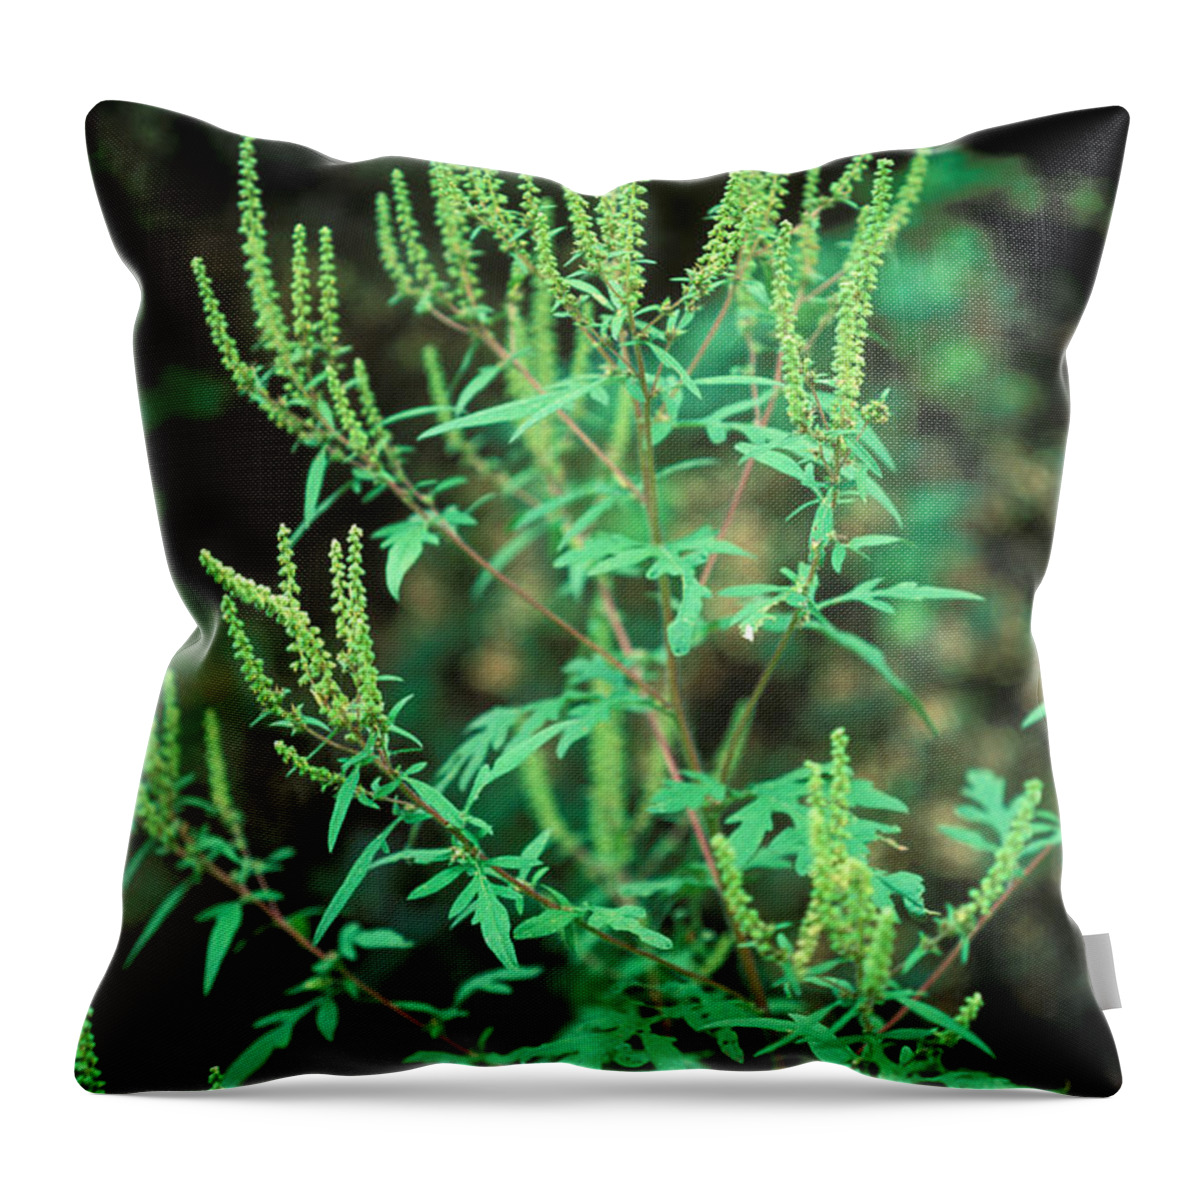 Plant Throw Pillow featuring the photograph Common Ragweed In Flower by John Kaprielian